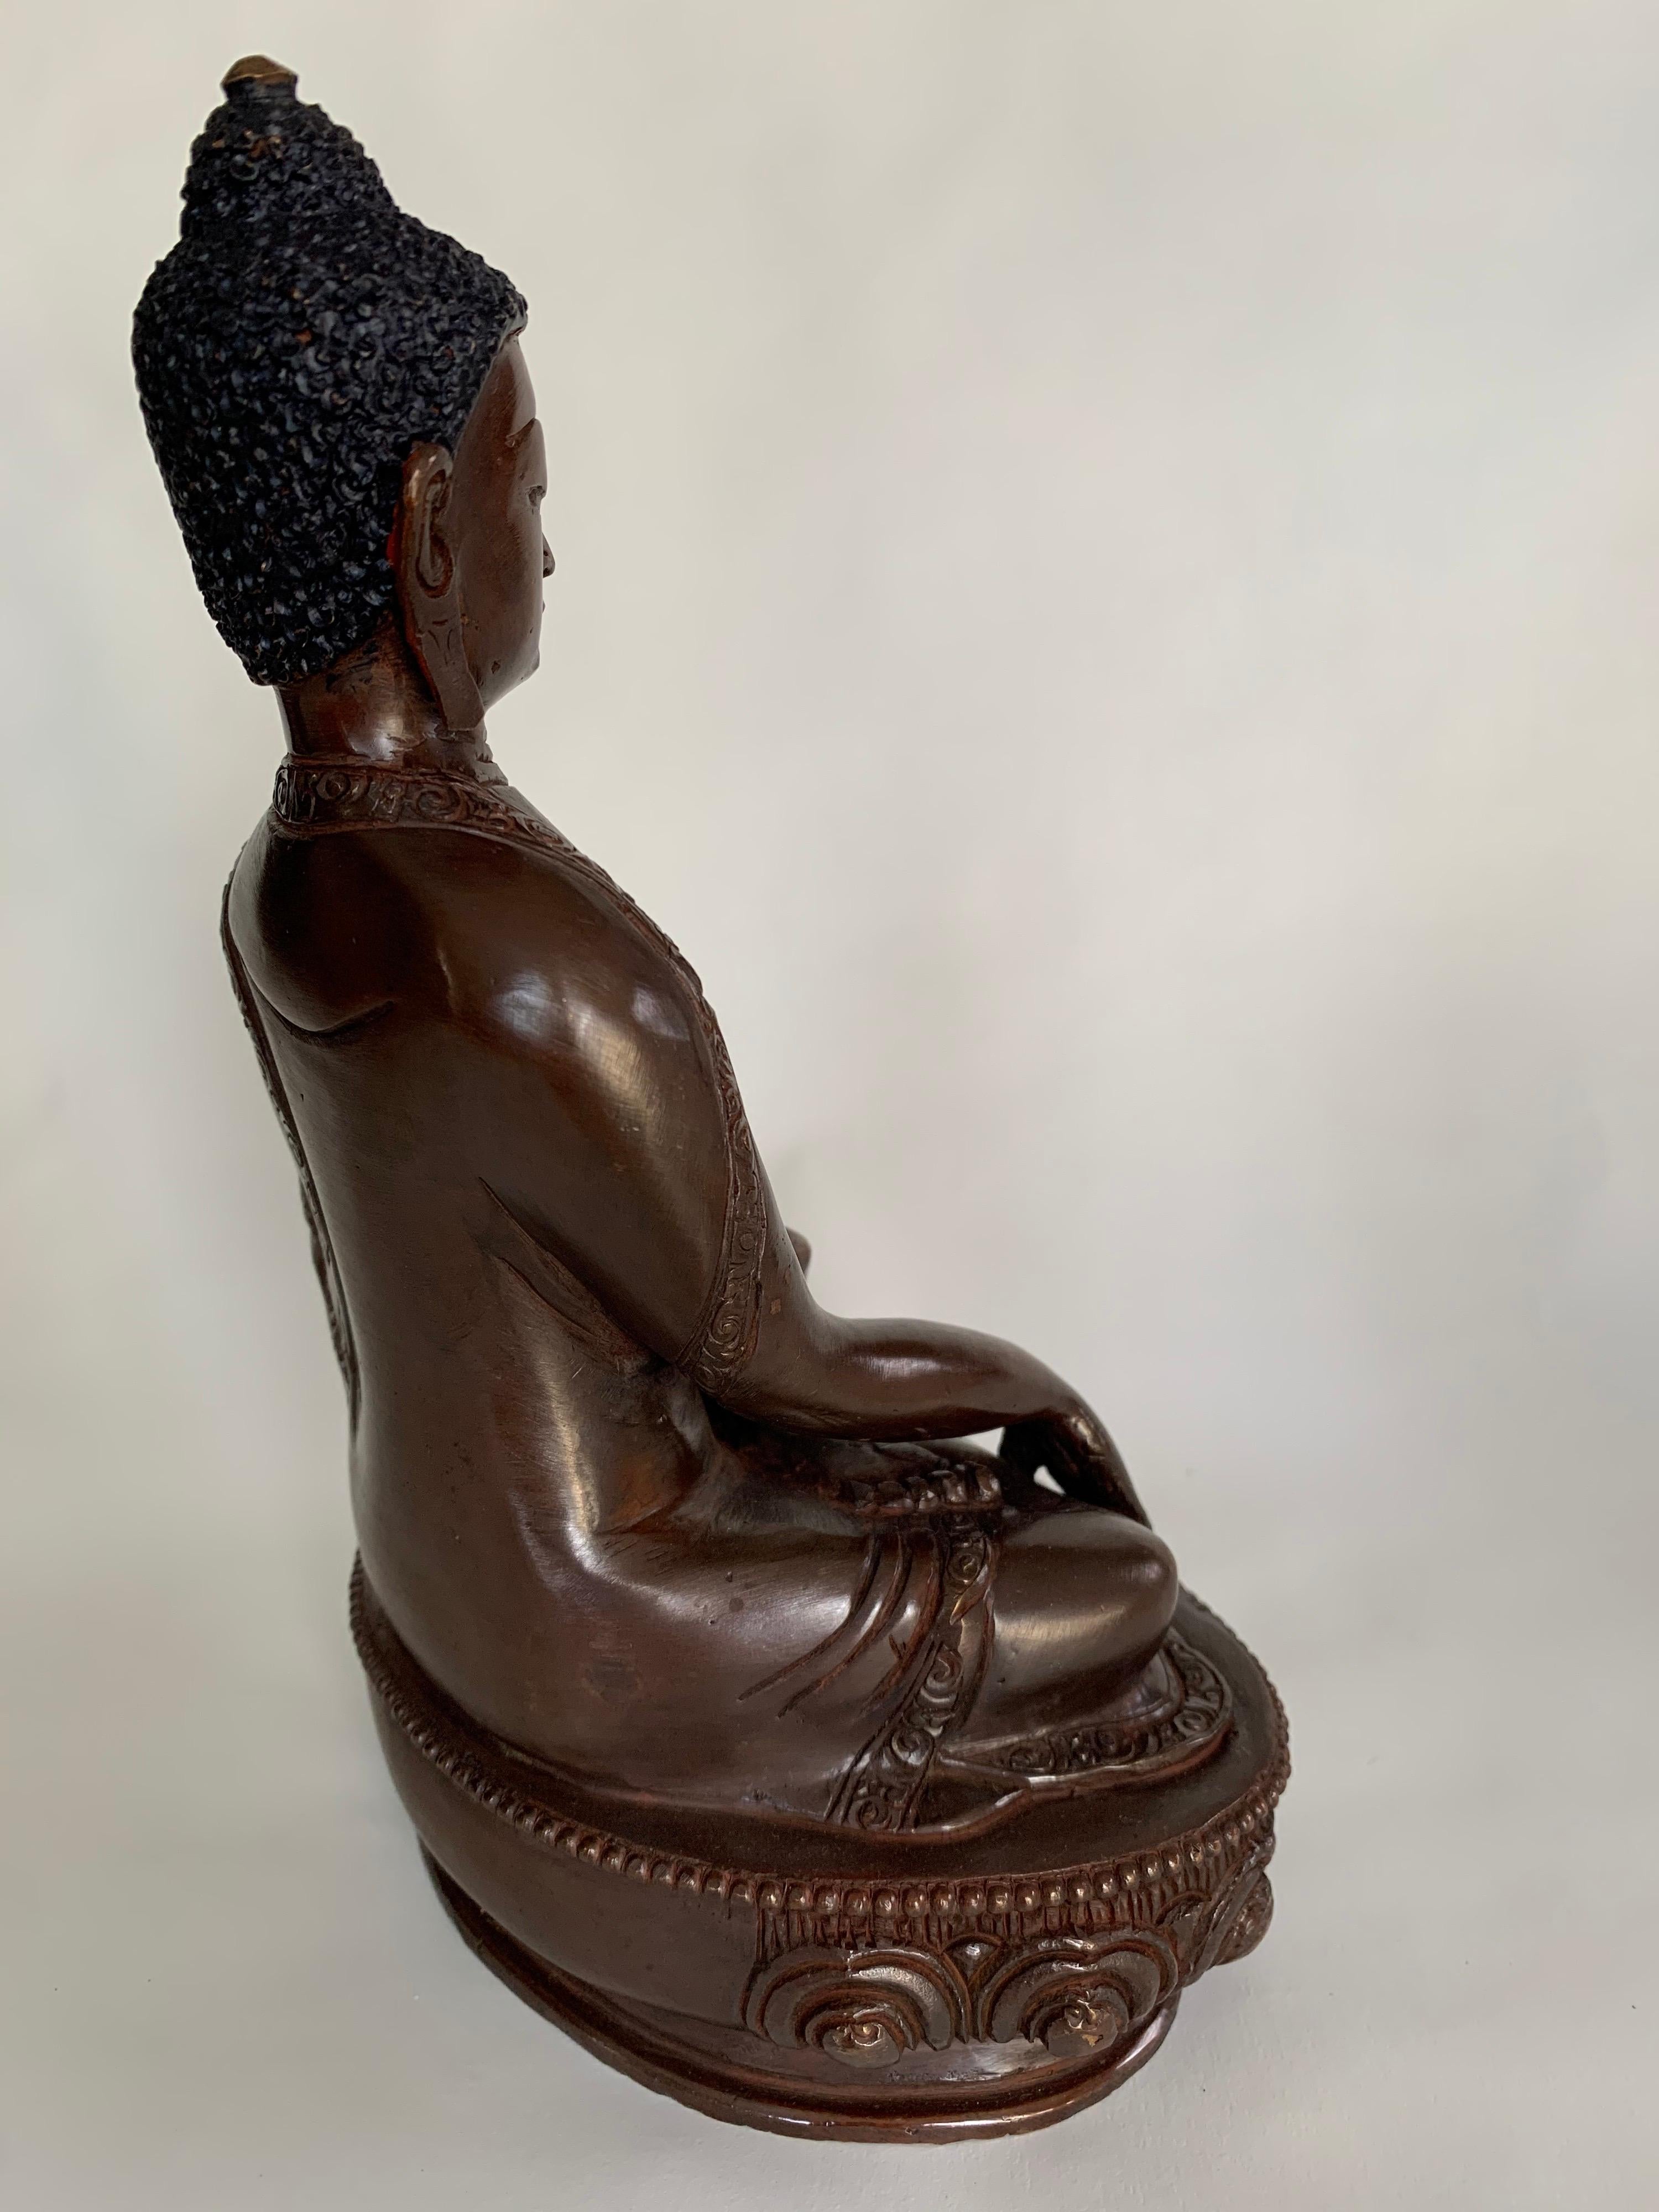 This statue is handcrafted by lost wax process which is one of the ancient process of metal craft. Buddha is seated on lotus in 